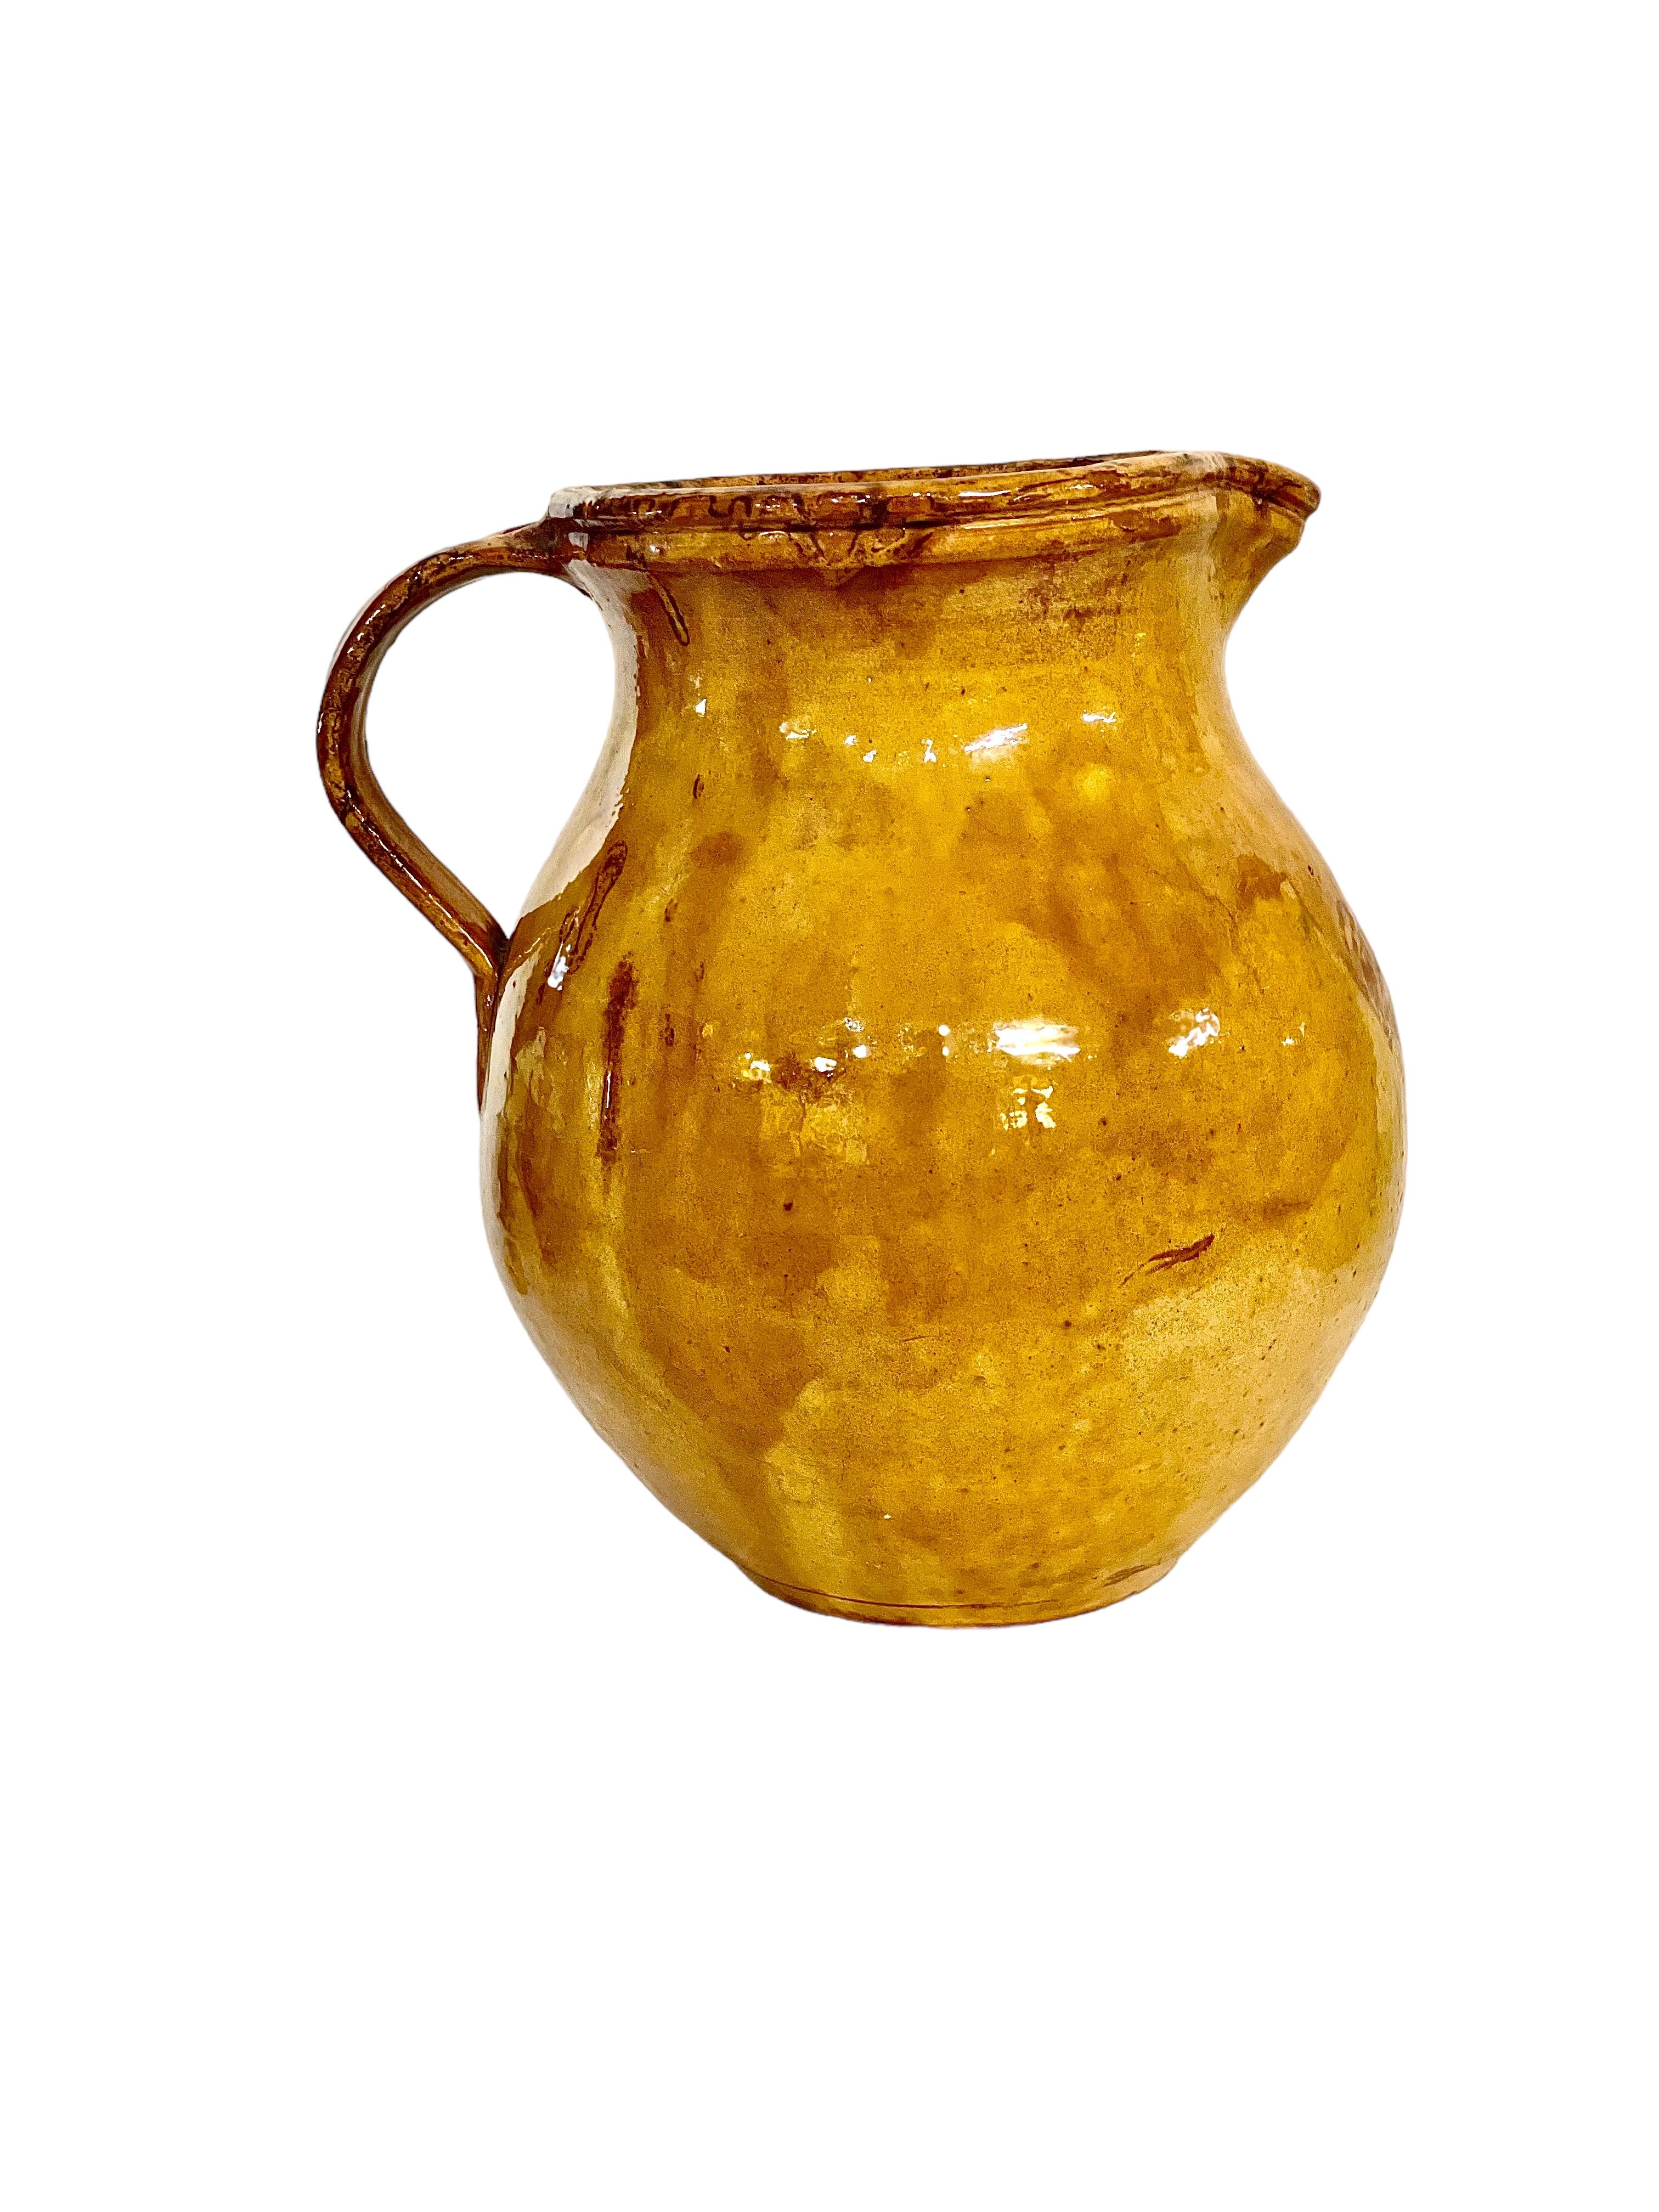 This is a beautiful example of an authentic, 19th century French water pitcher from the Provence region. Glazed internally and externally, this wonderful sunshine-yellow jug has a large side handle and pouring spout, and is sturdily built with a